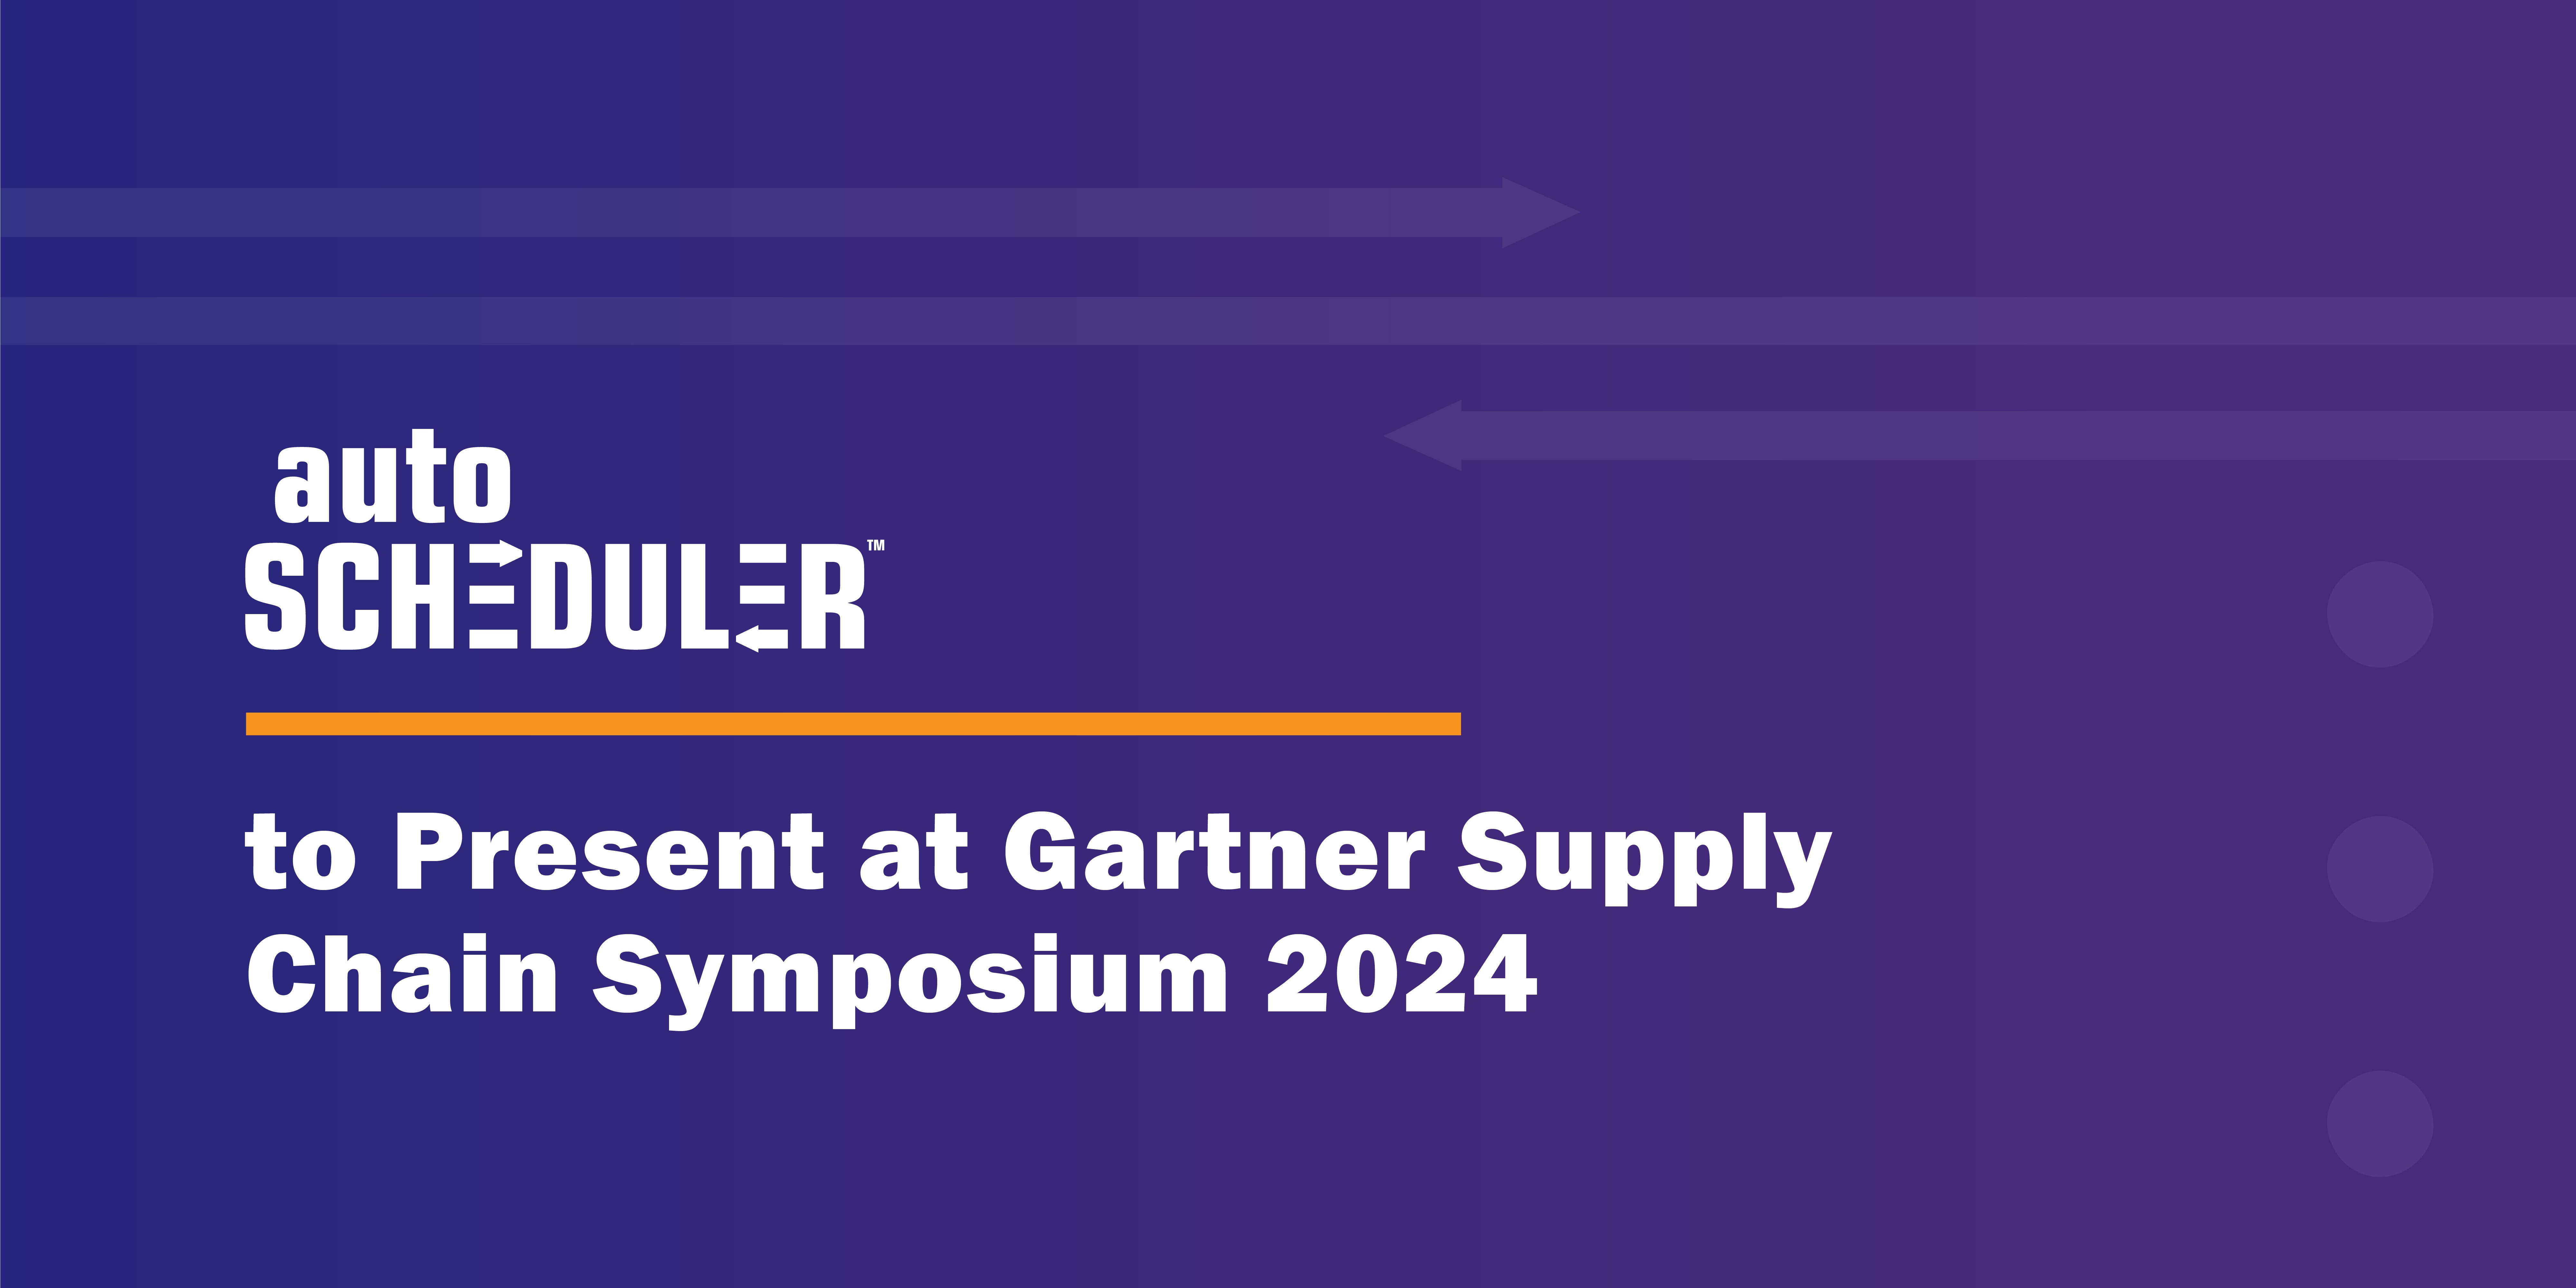 AutoScheduler to Present at Gartner Supply Chain Symposium on Centralized Warehouse Orchestration and Decision-Making with Predictive Analytics